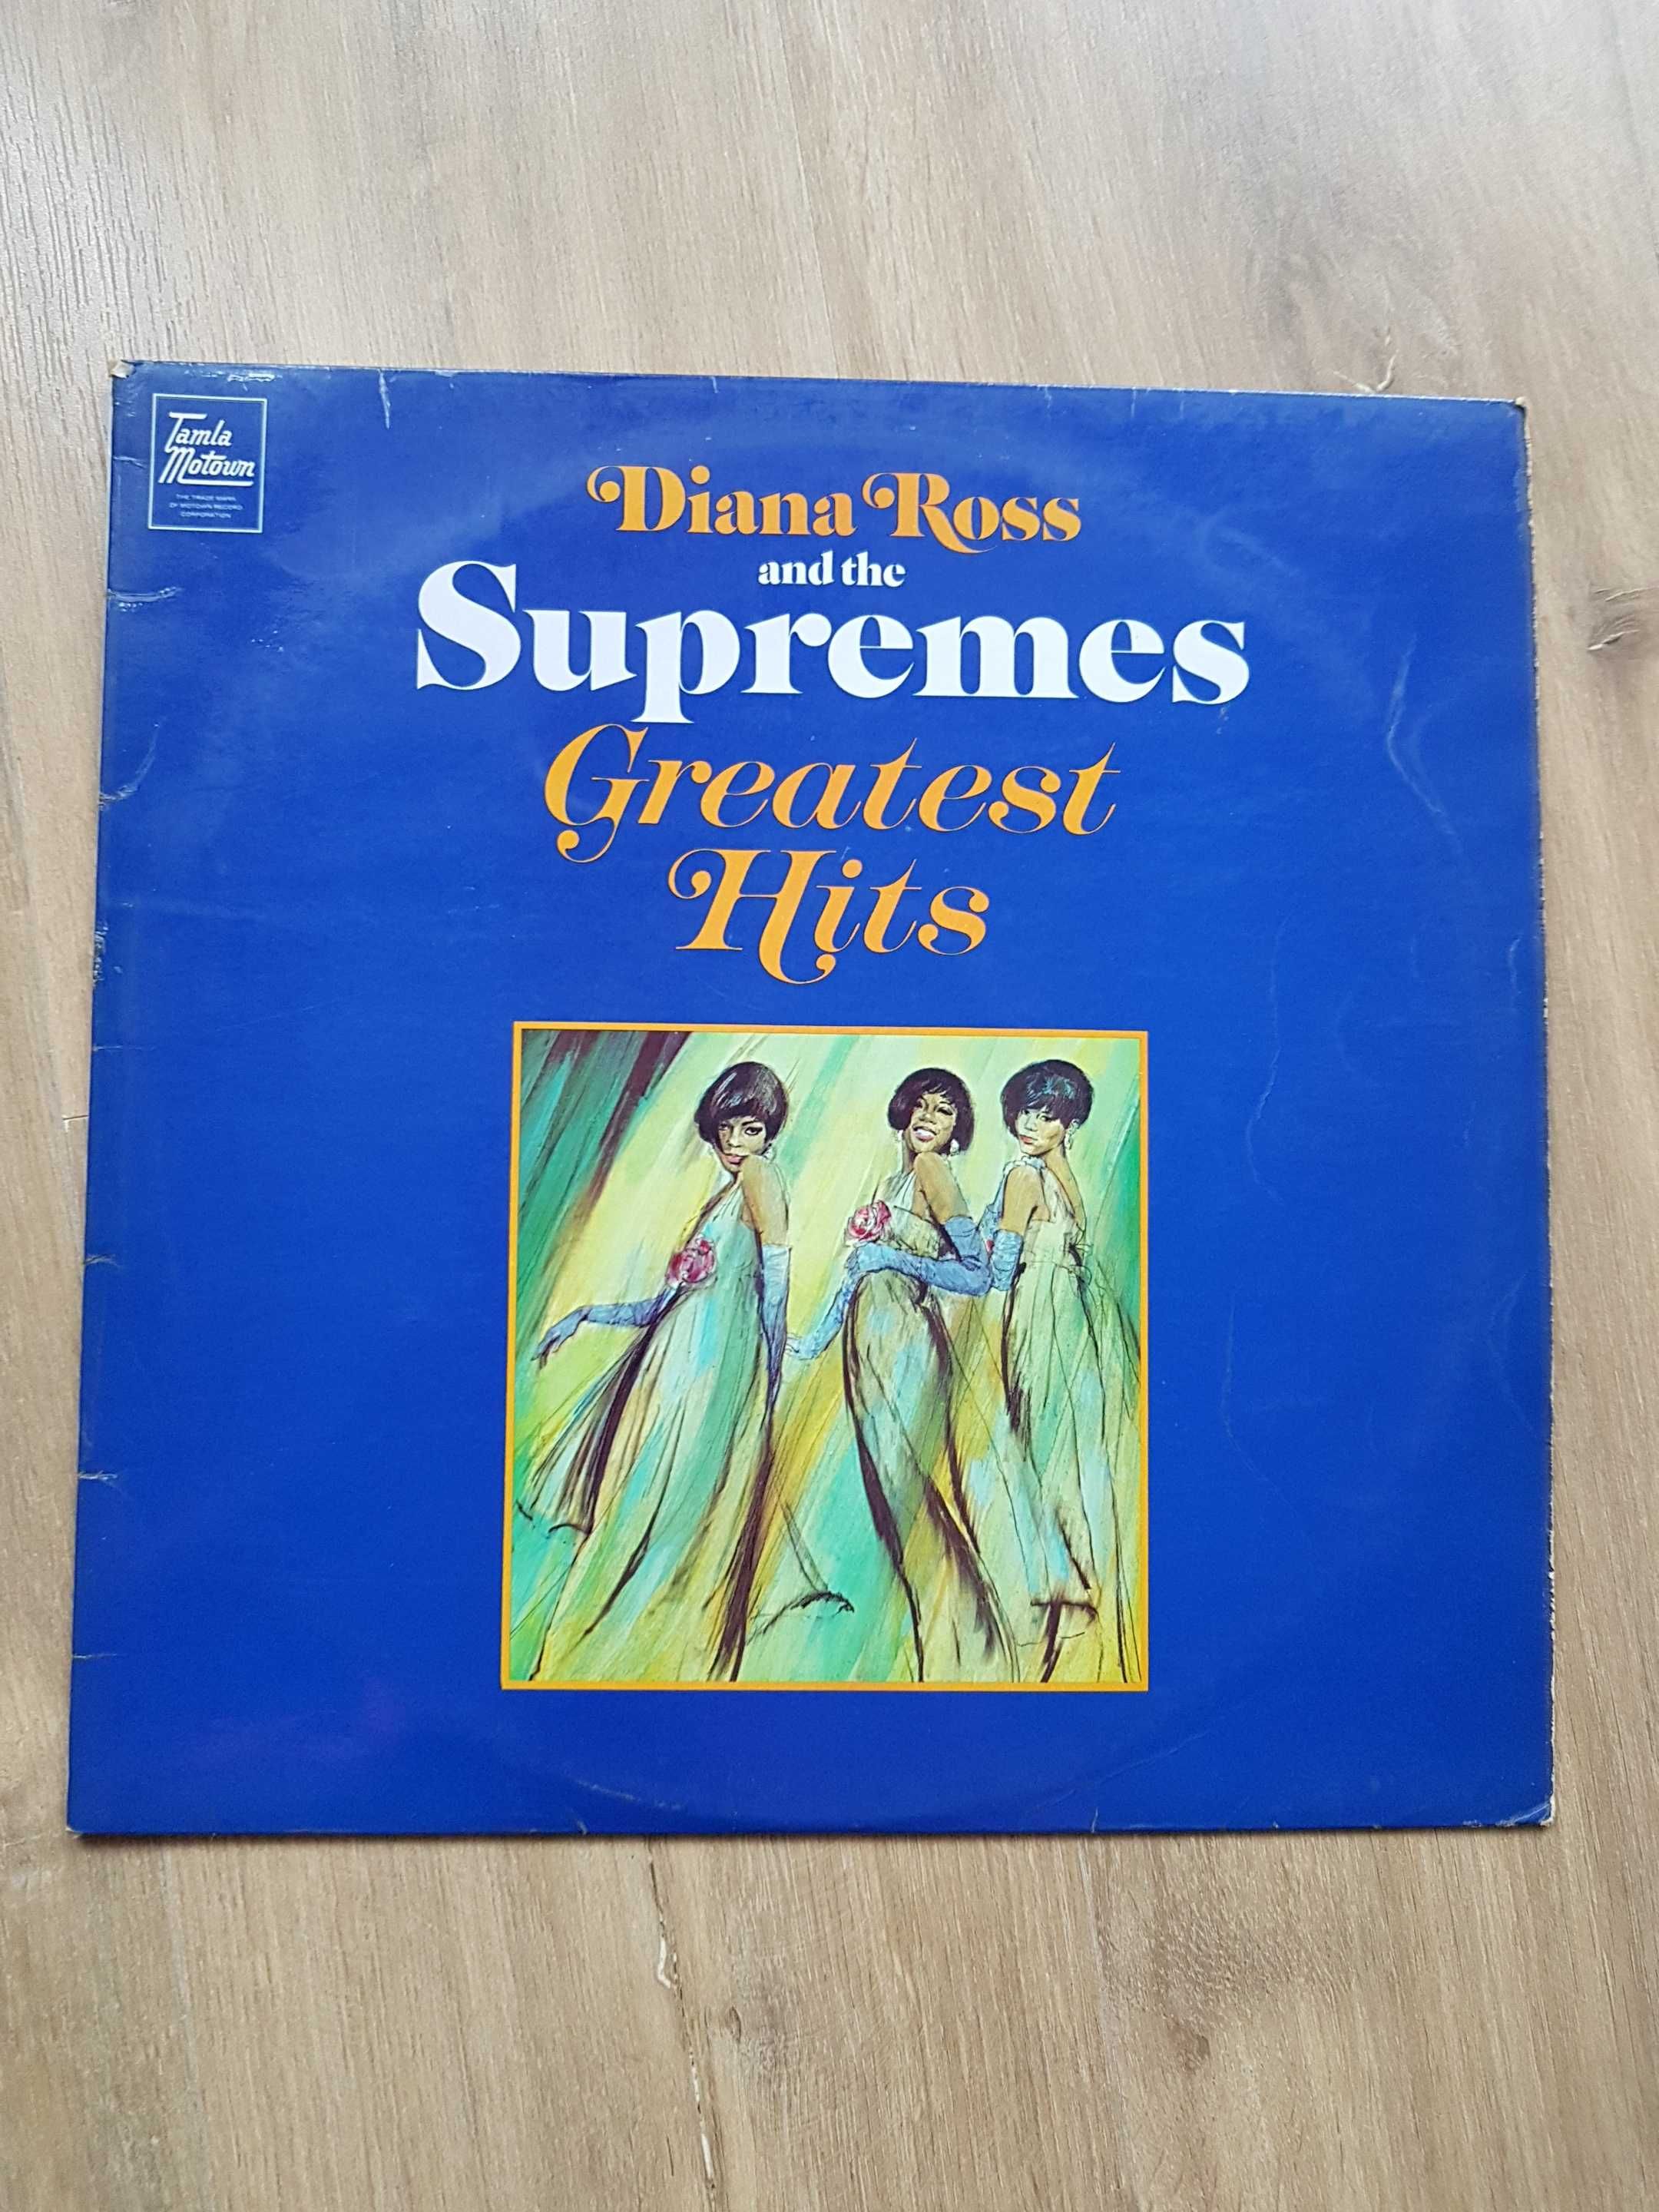 Diana Ross and the Supremes Greatest Hits E.M.I. RECORDS rok 1966